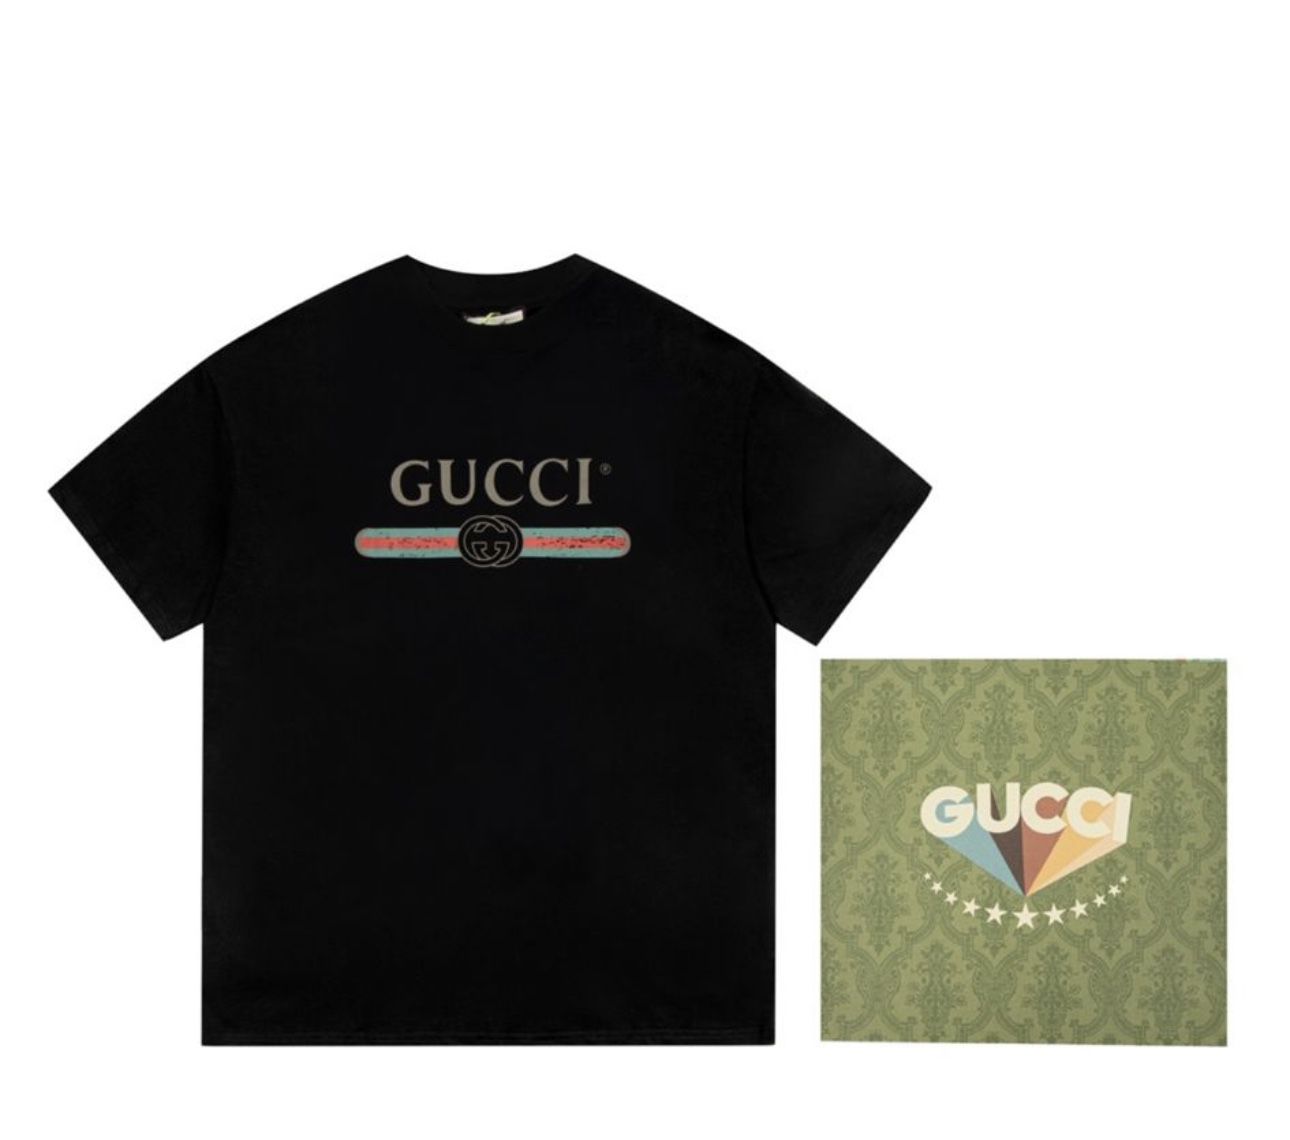 Gucci Oversized T-shirt for Sale in Orlando, FL - OfferUp